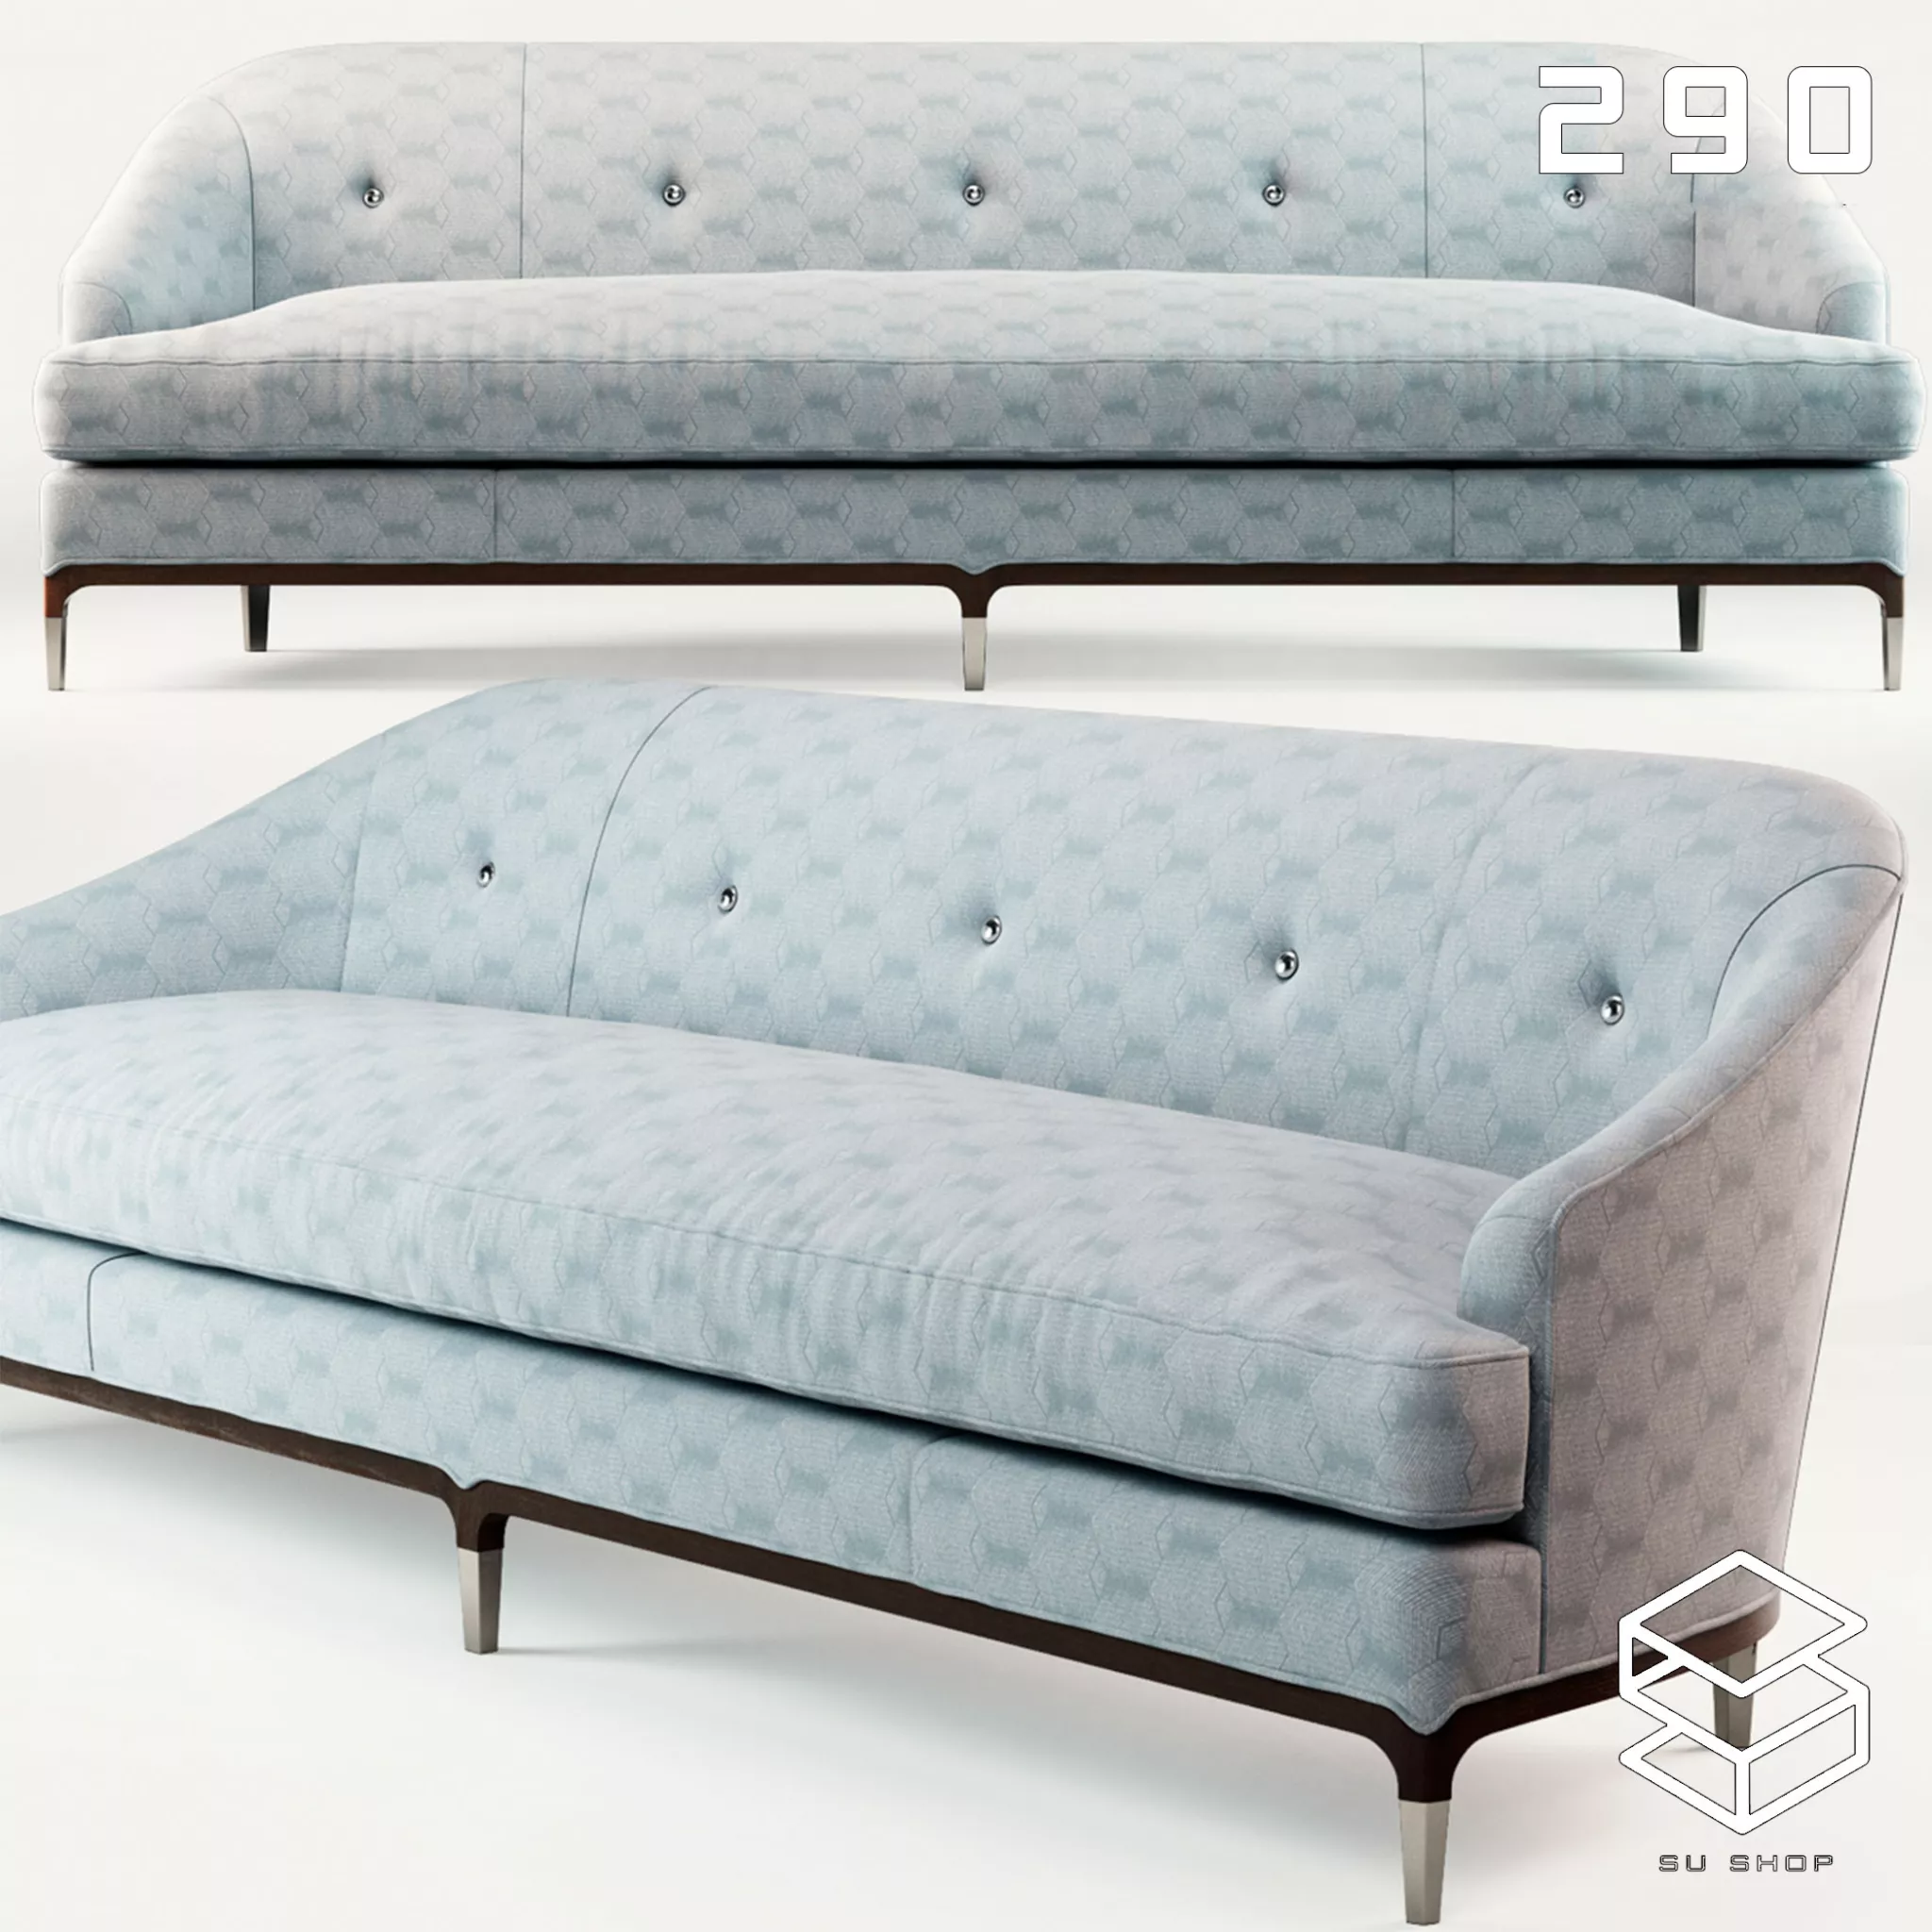 MODERN SOFA - SKETCHUP 3D MODEL - VRAY OR ENSCAPE - ID13597